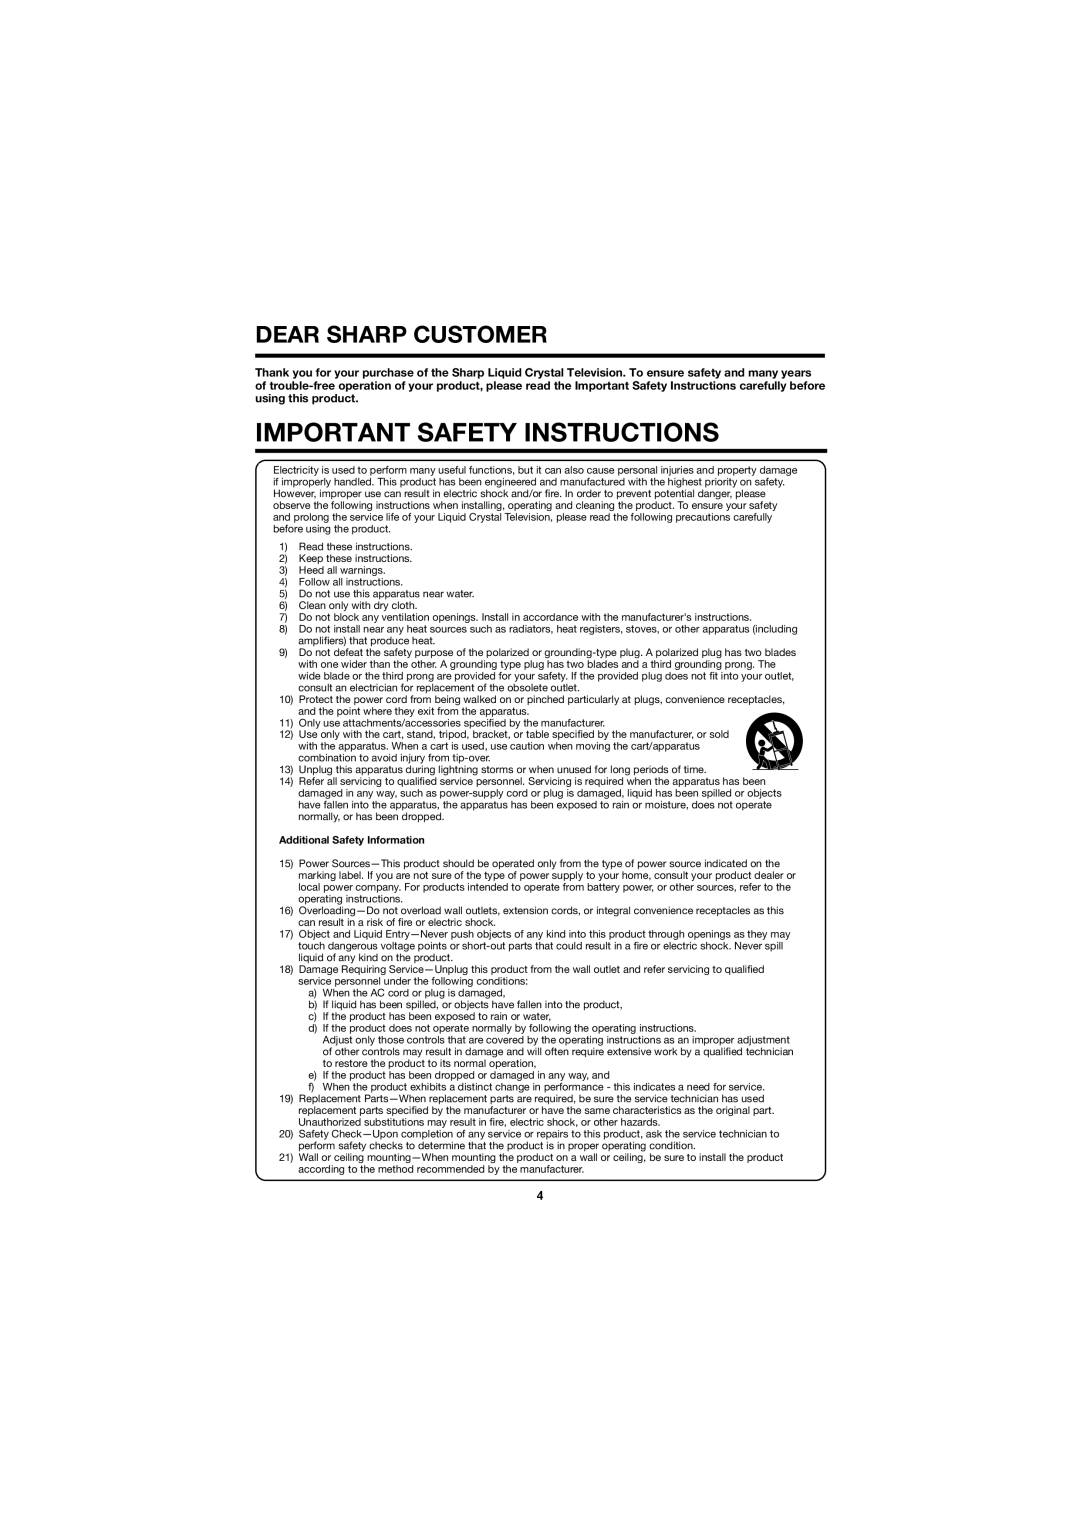 Sharp LC C4067U operation manual Important Safety Instructions, Dear Sharp Customer, Additional Safety Information 